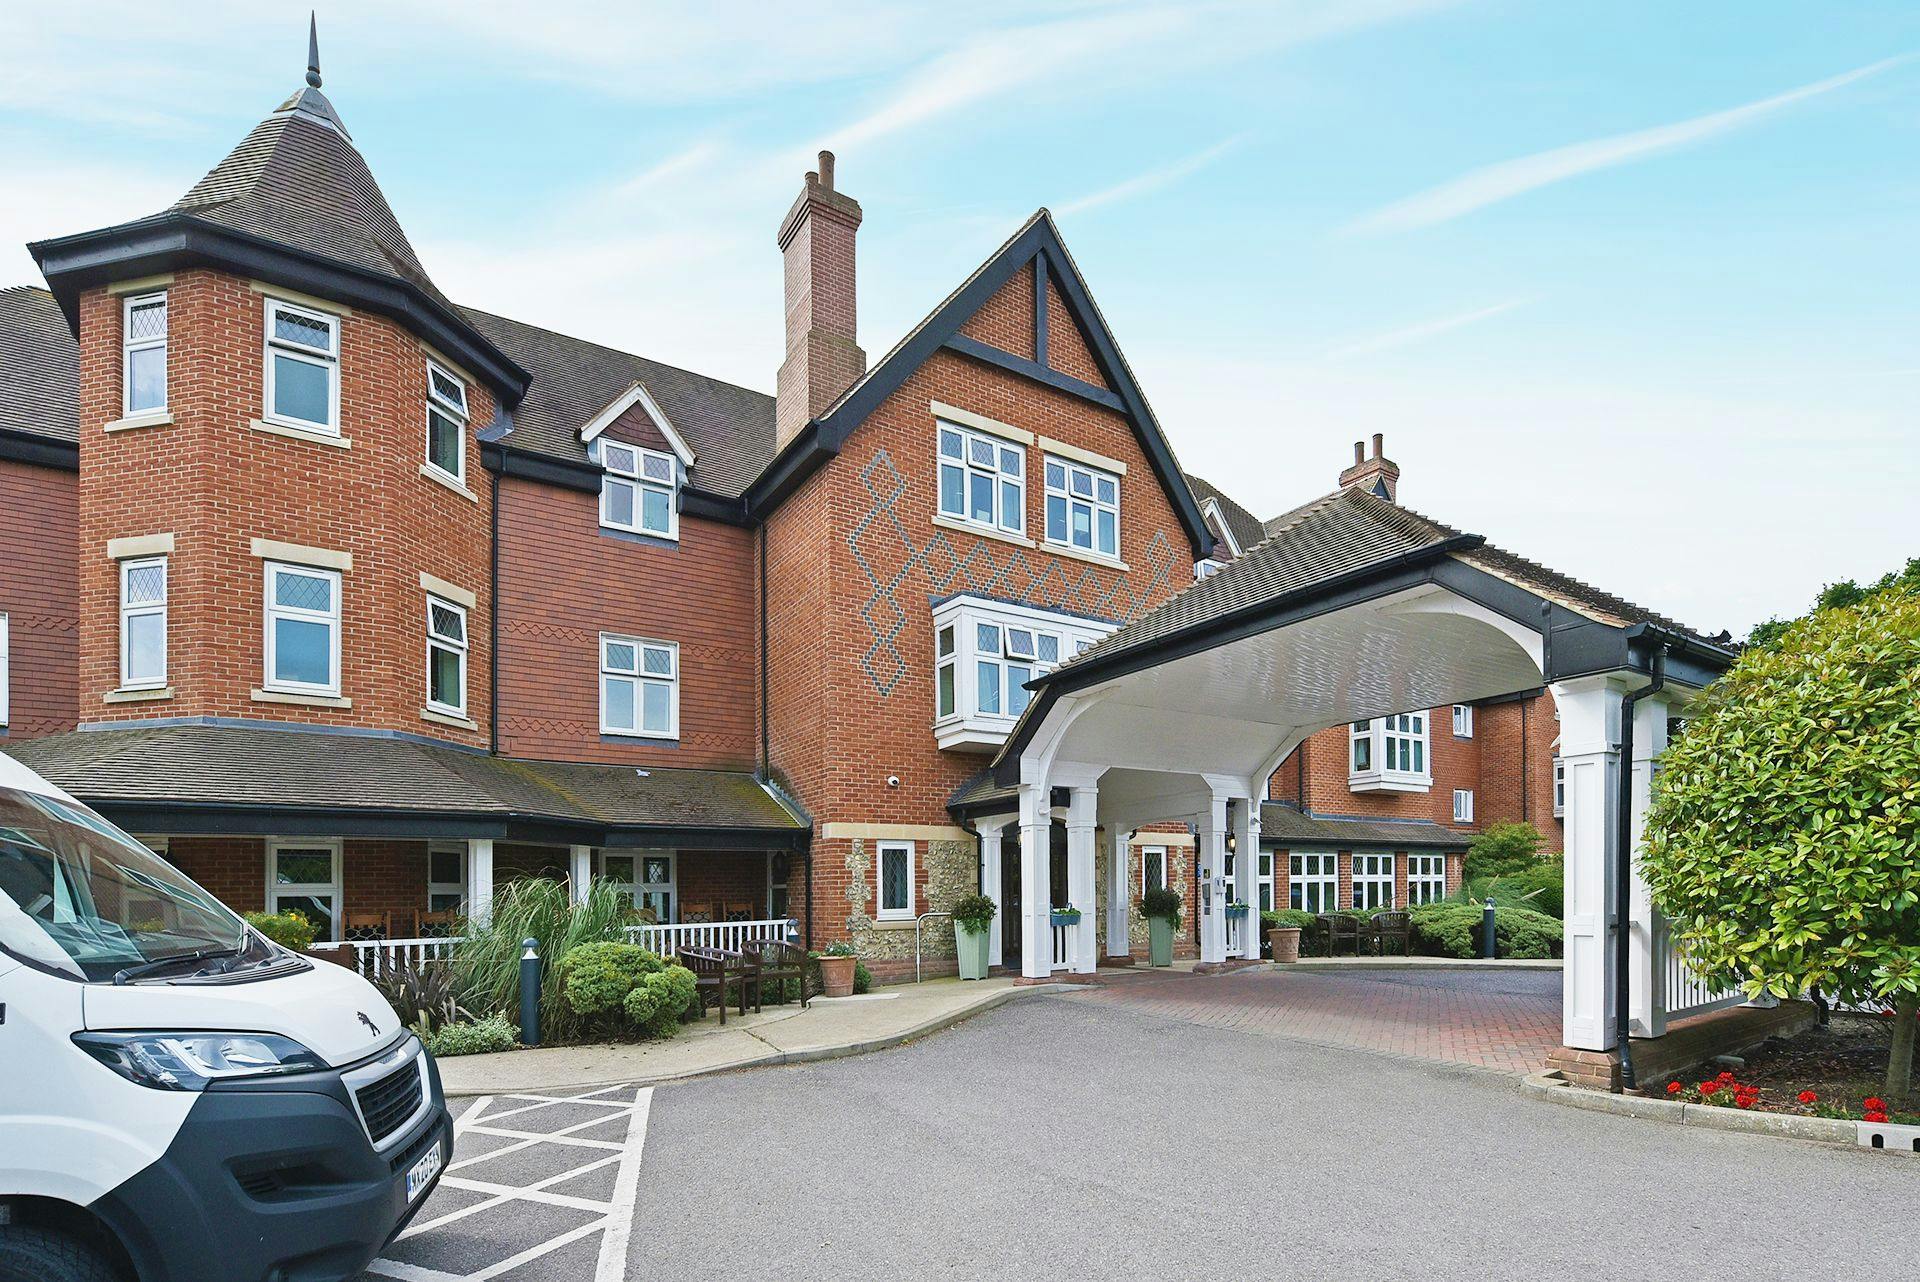 Exterior at Sonning Gardens care home in Sonning, Berkshire